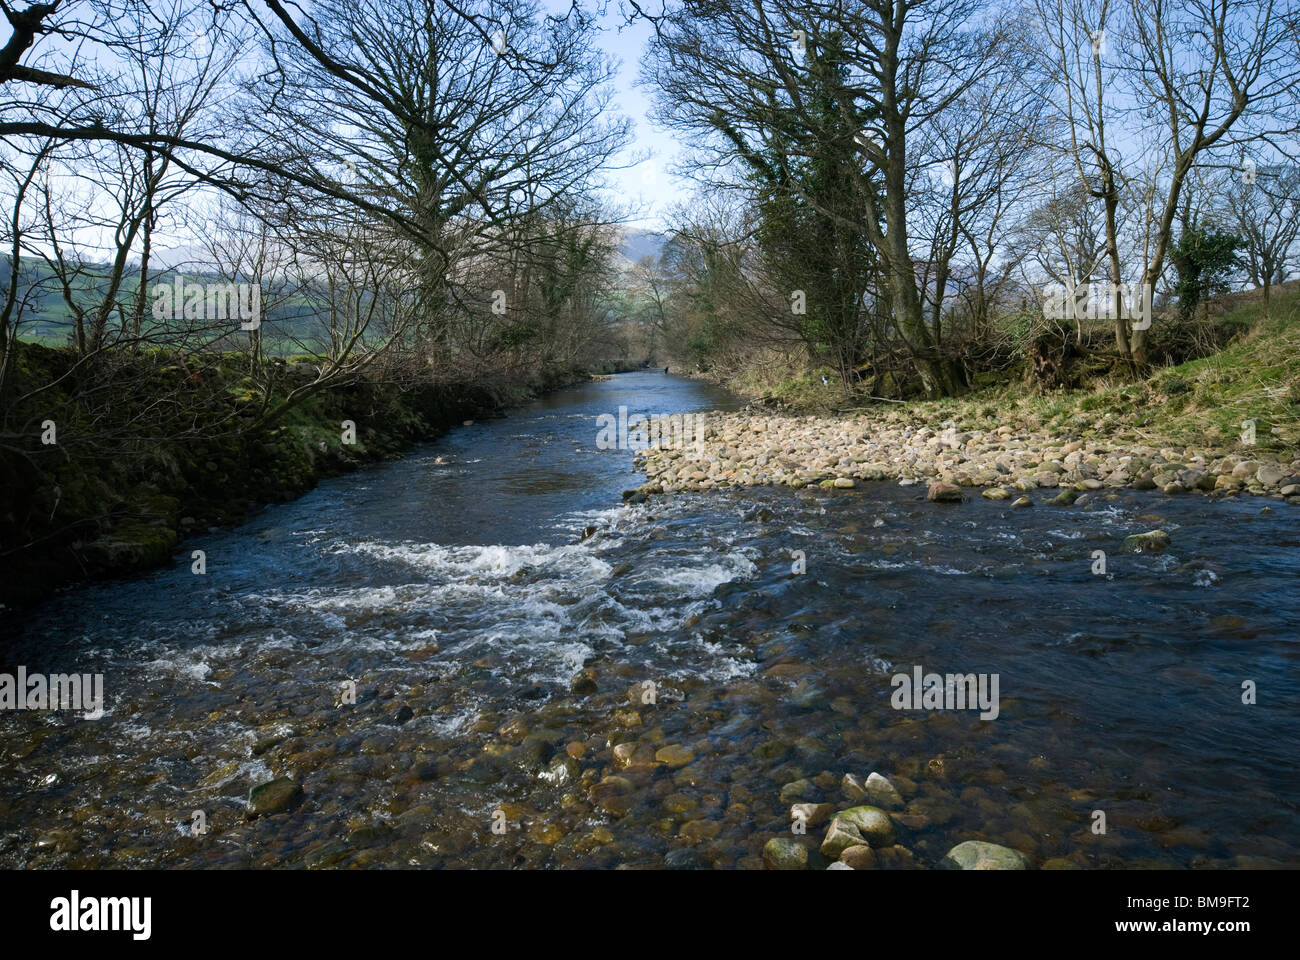 The river Dent near the village of Dent, Yorkshire Dales National Park, Cumbria, England, UK Stock Photo